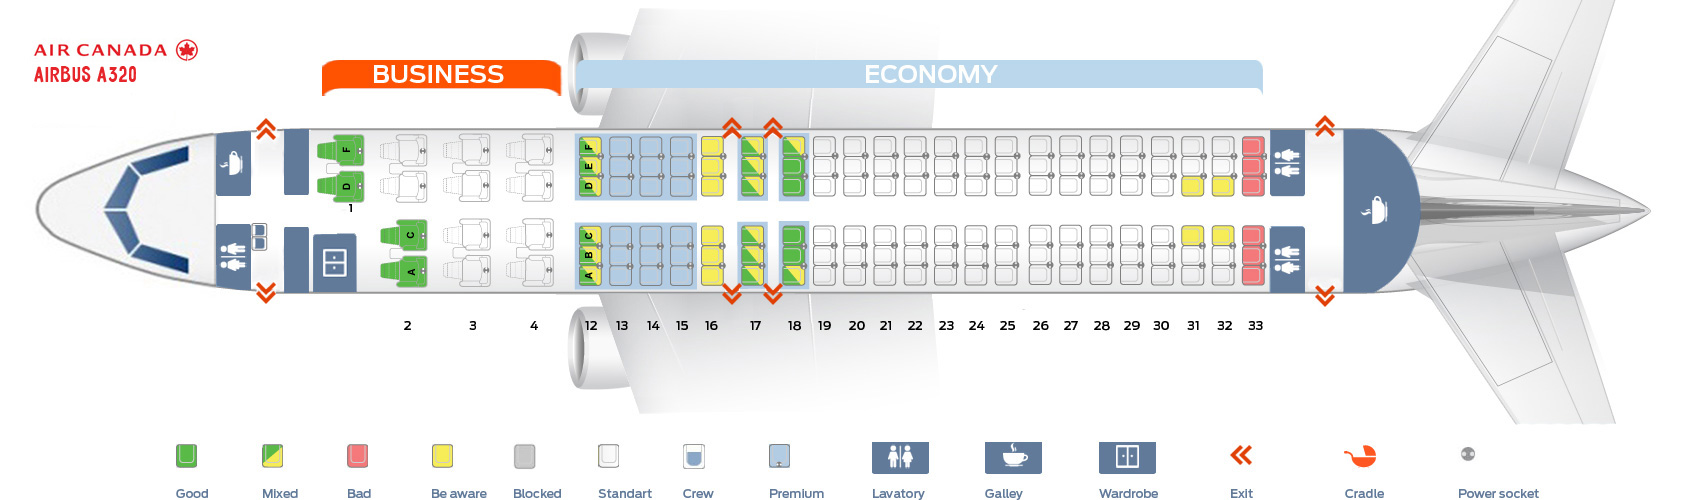 Seat map Airbus A320200 Air Canada. Best seats in plane